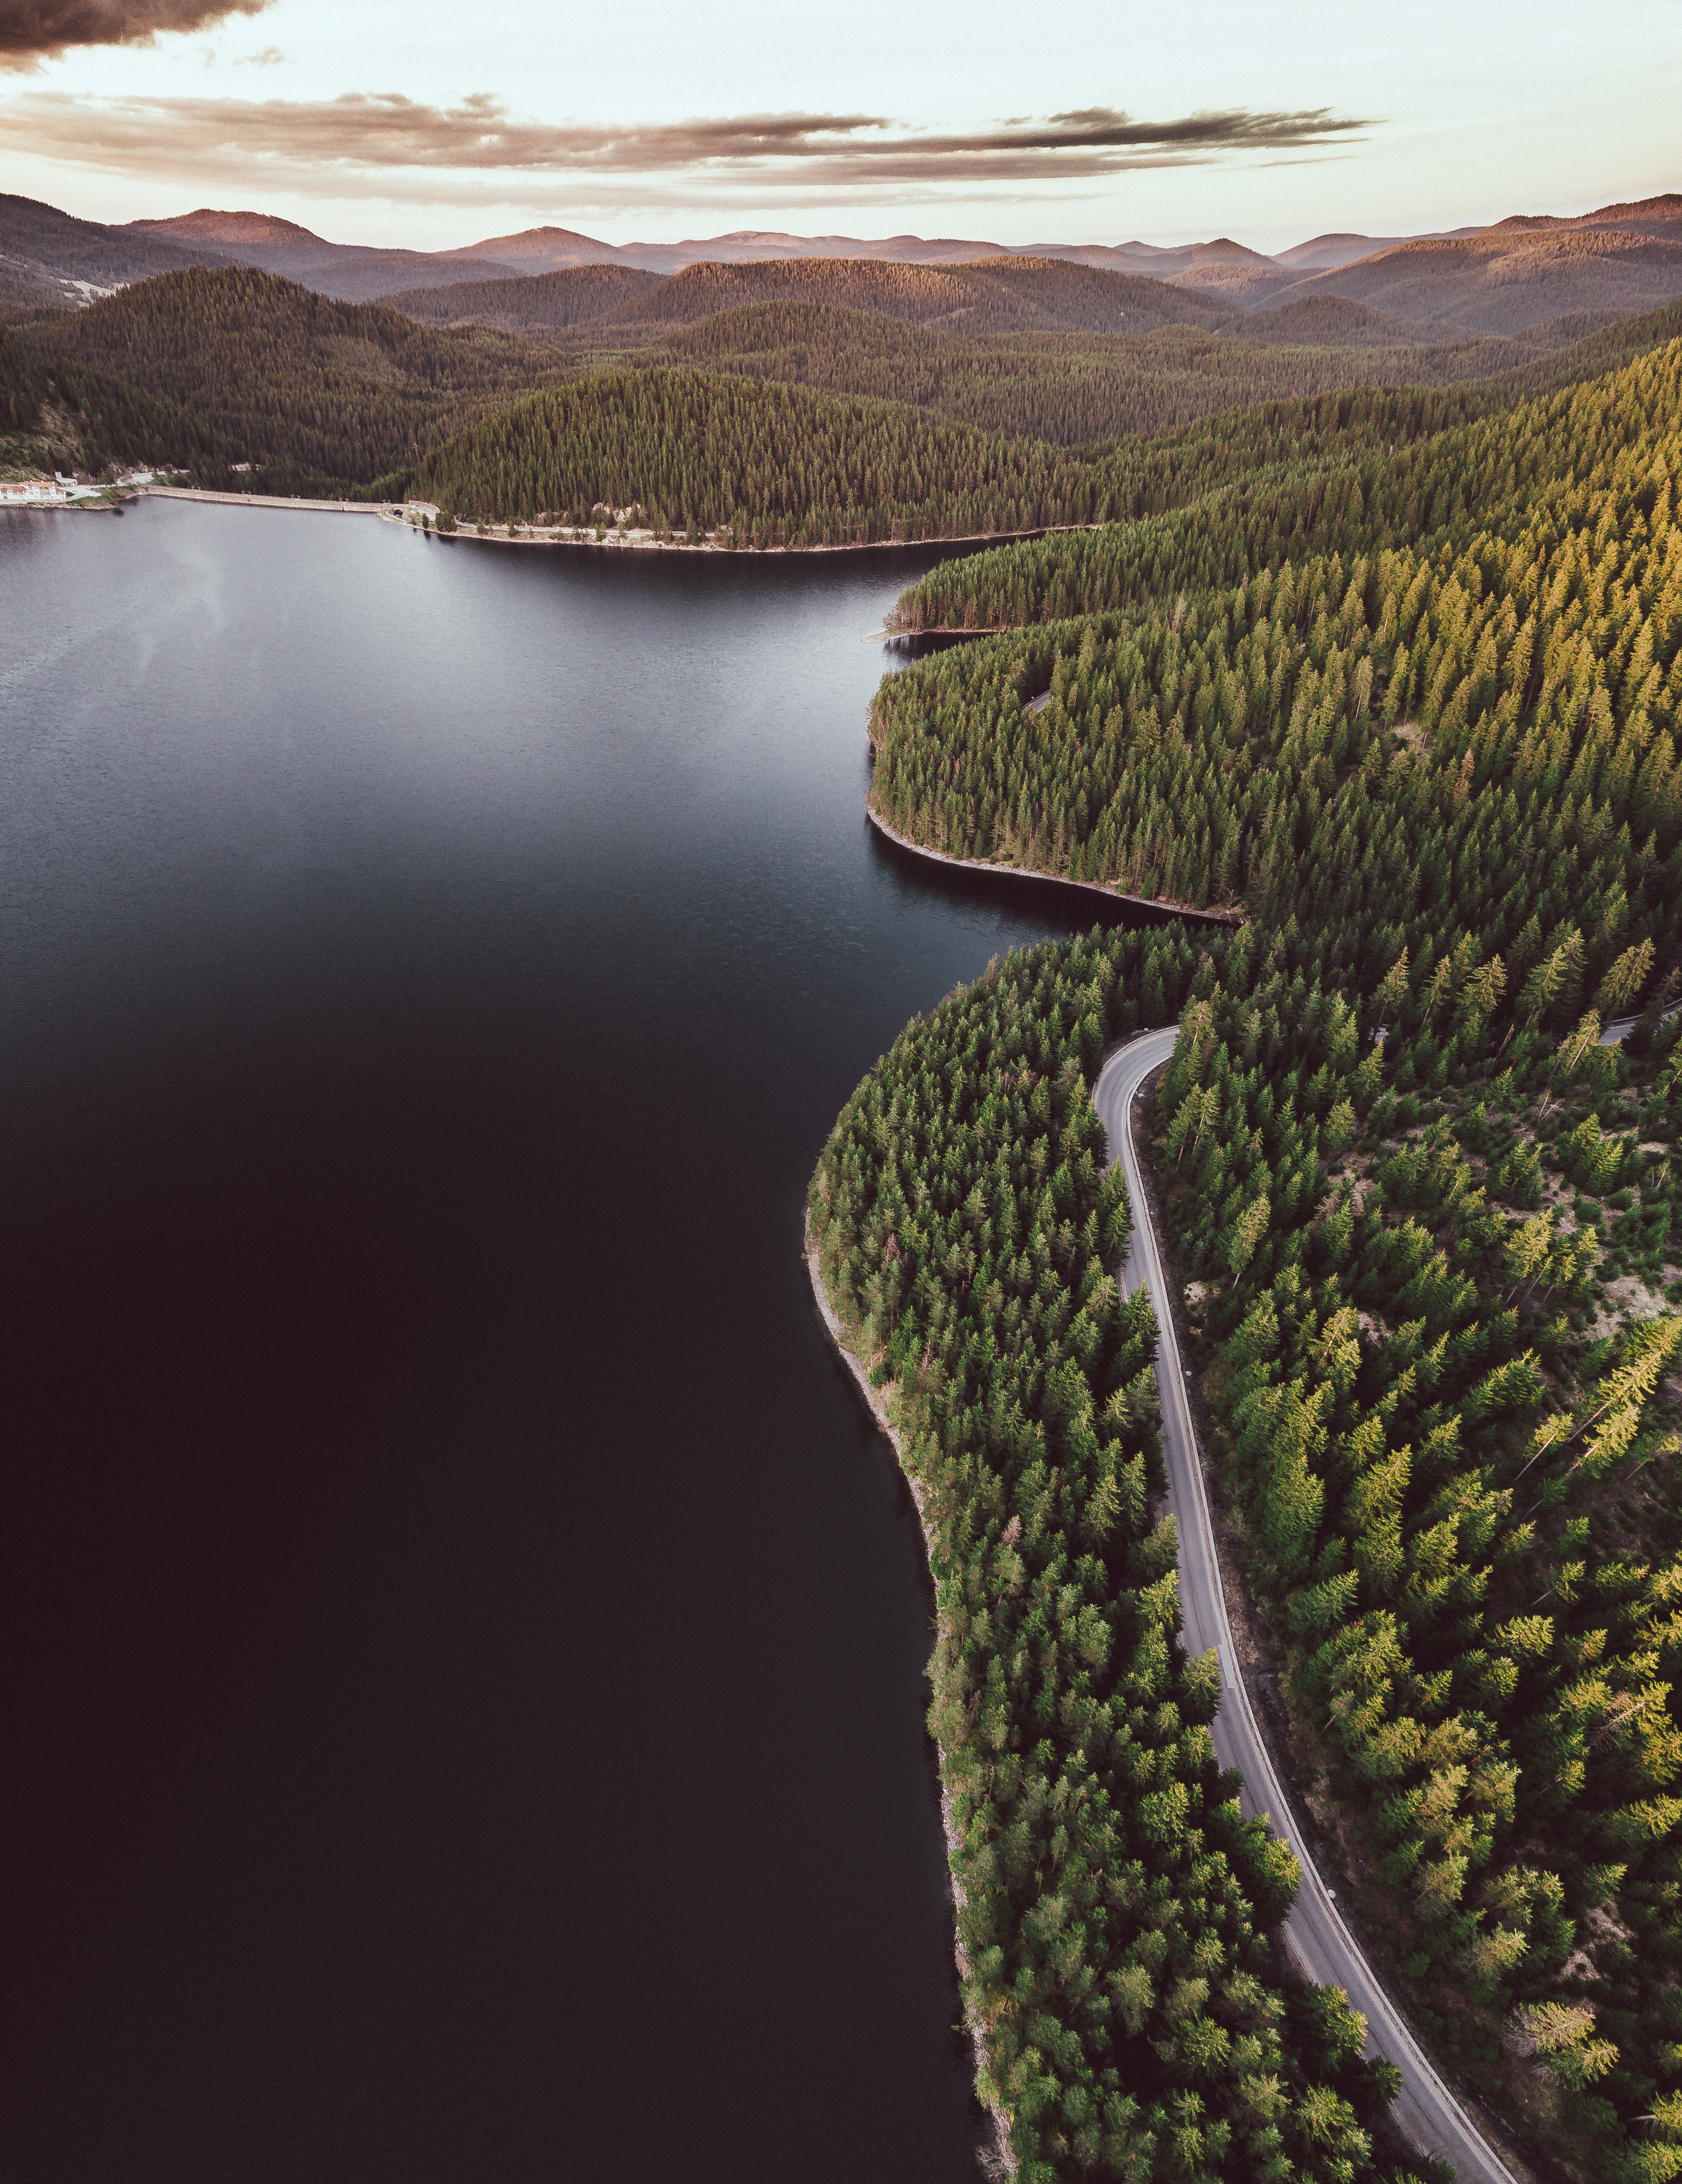 android shore, nature, view from above, lake, bank, road, forest, hills